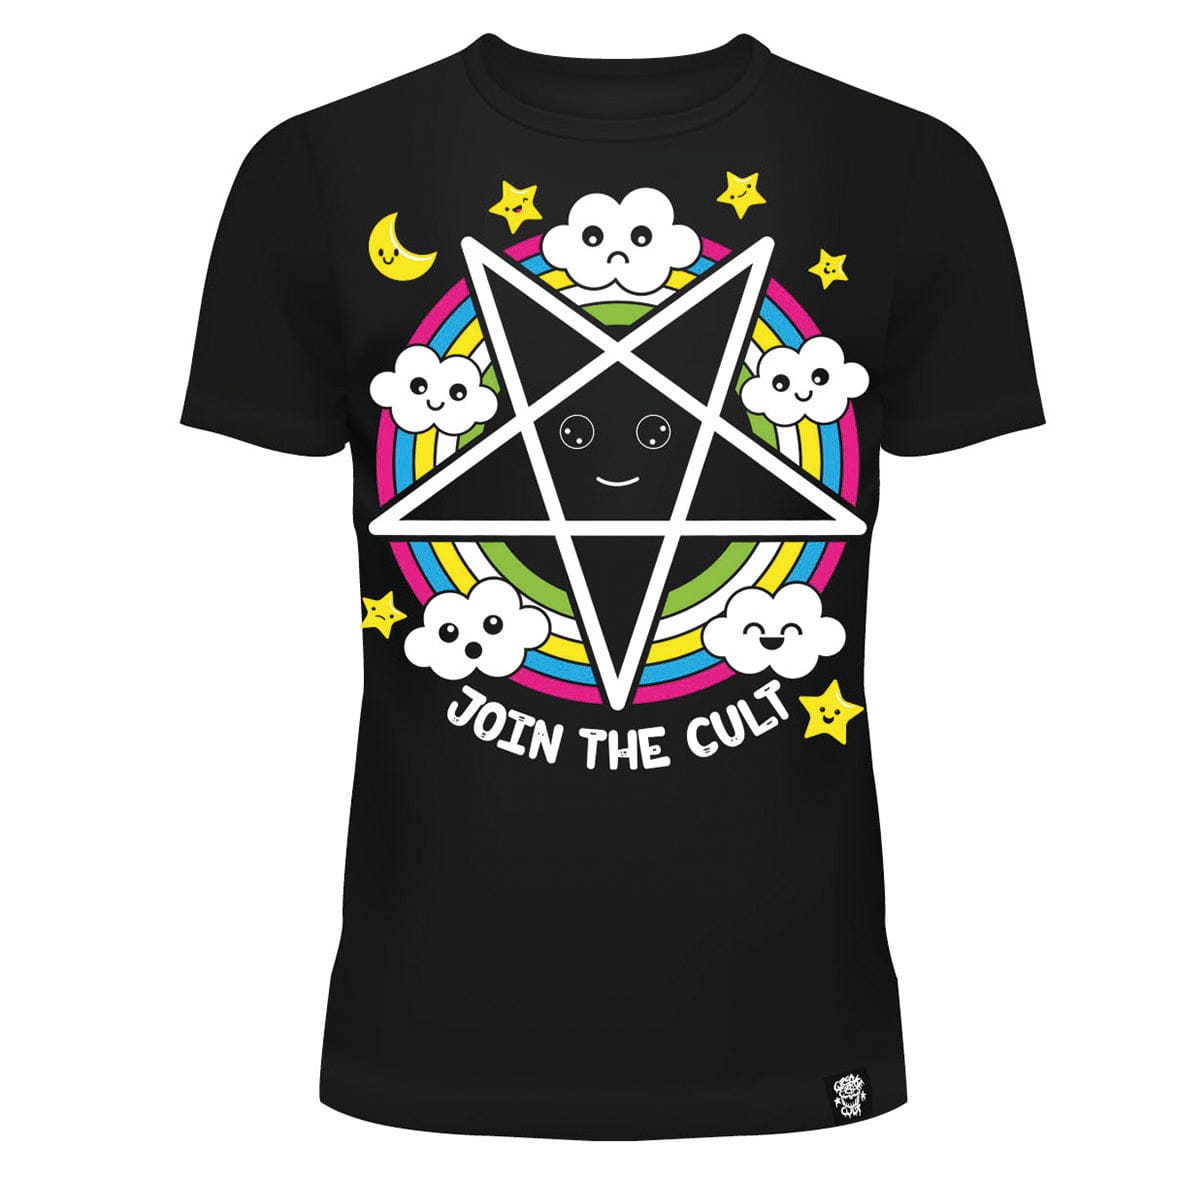 JOIN THE CULT T SHIRT - BLACK/MULTI